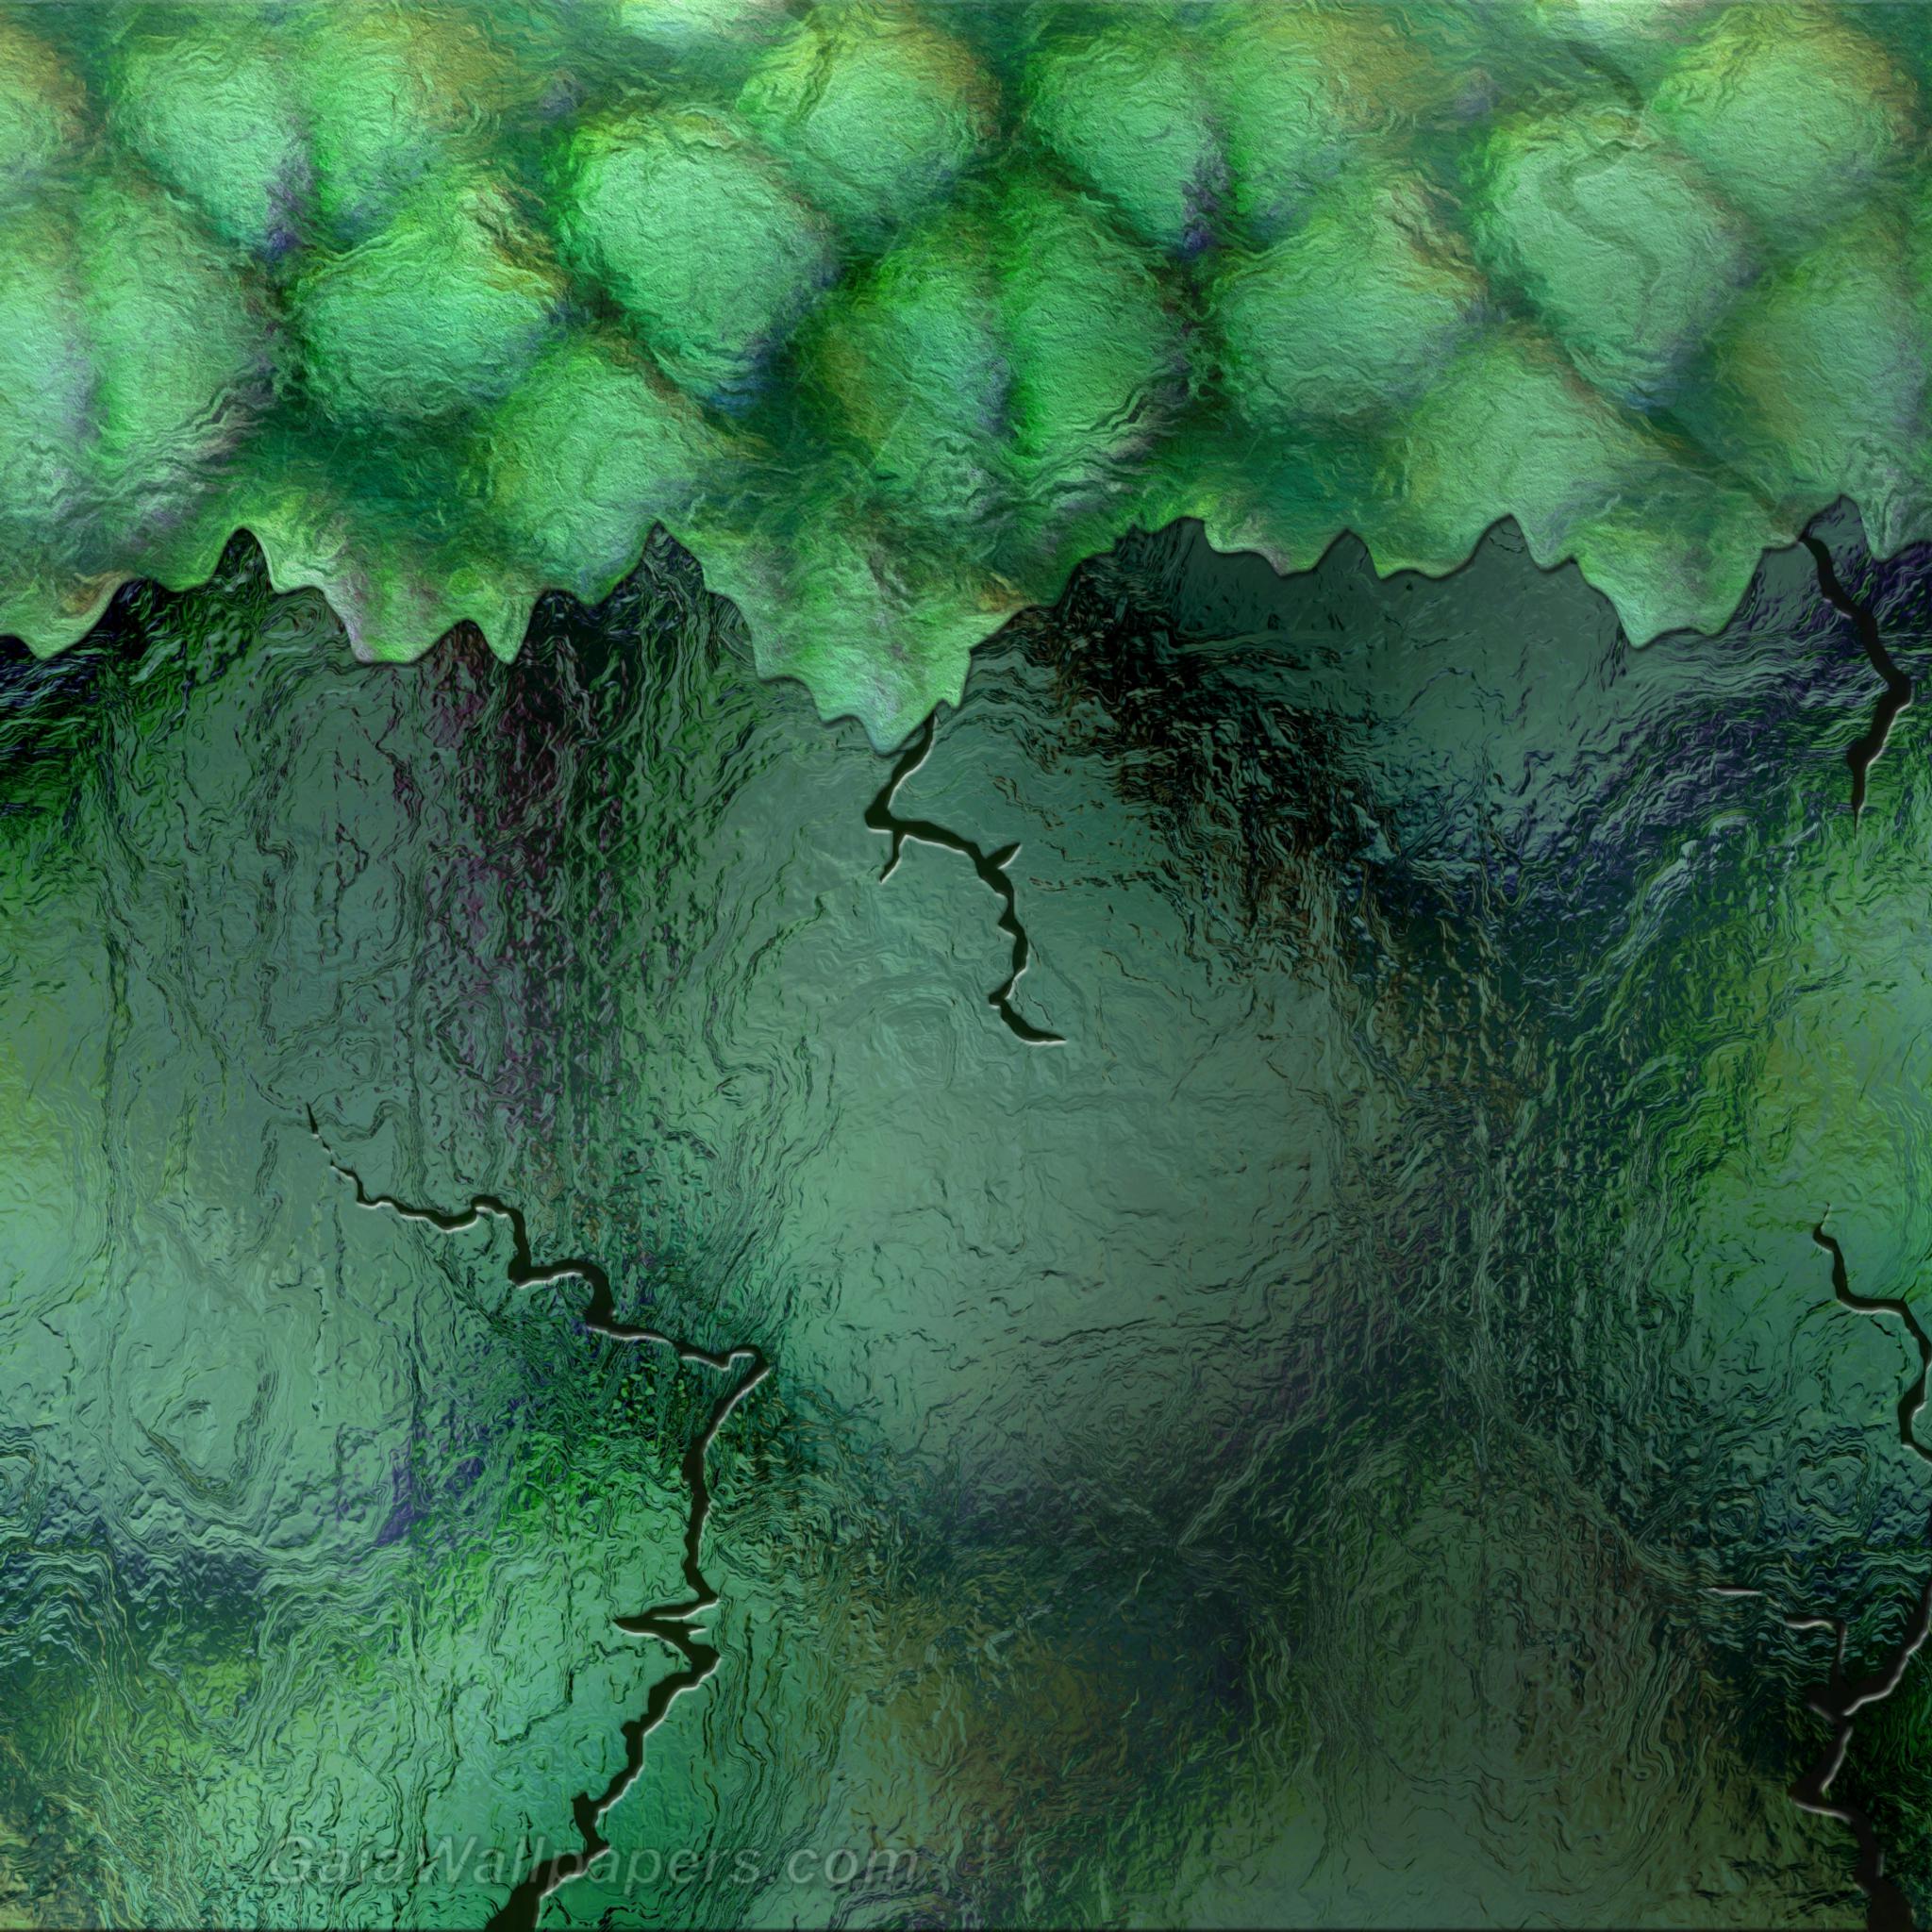 Abstract wall of green slime - Free desktop wallpapers